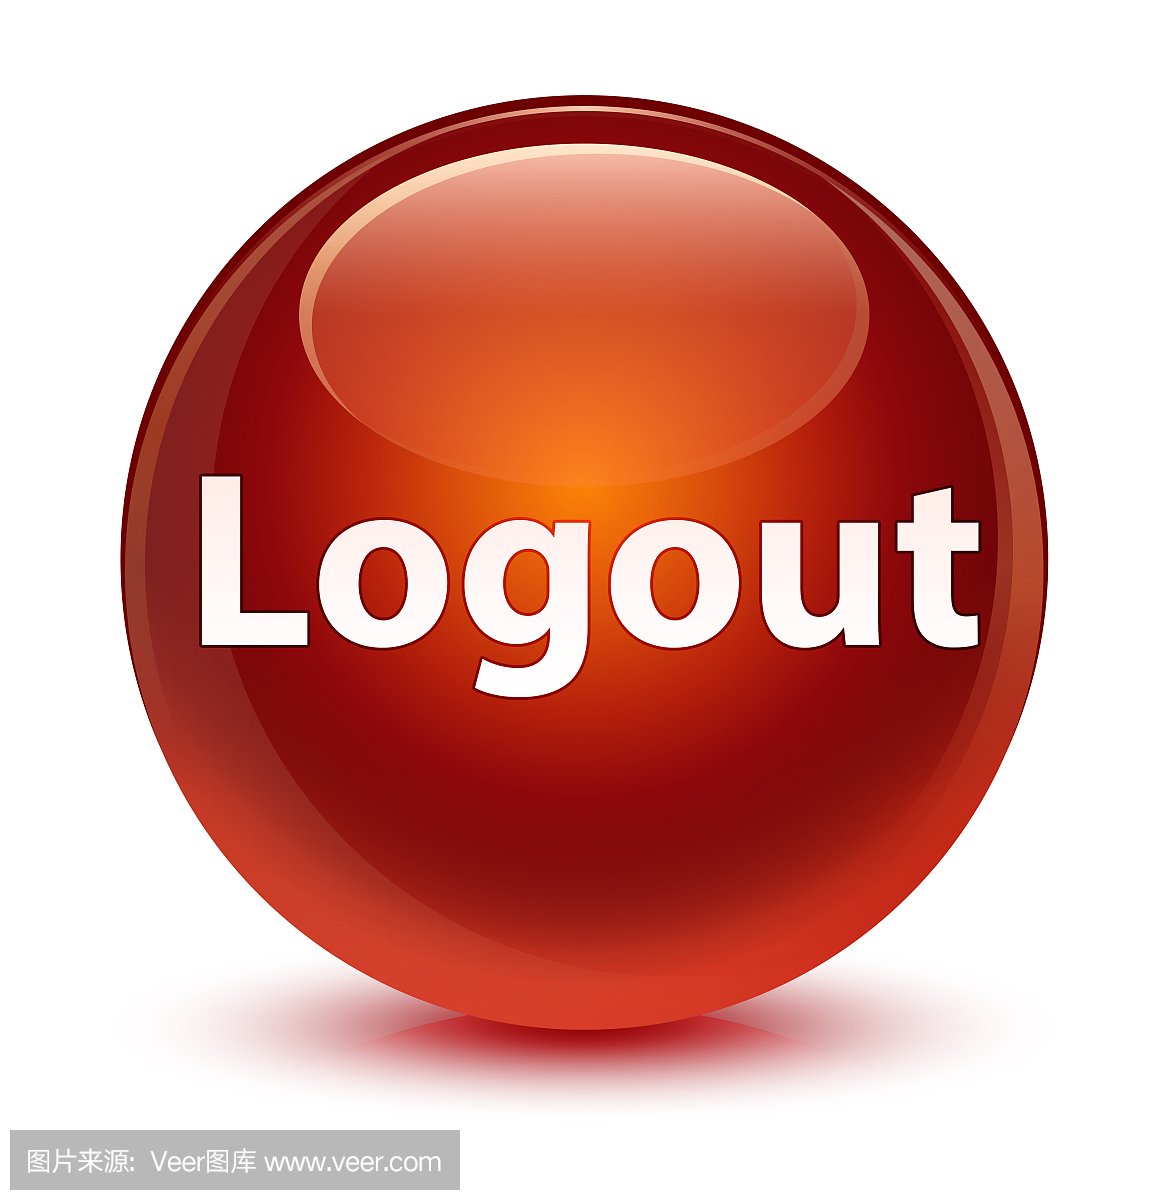 Logout glassy brown round button